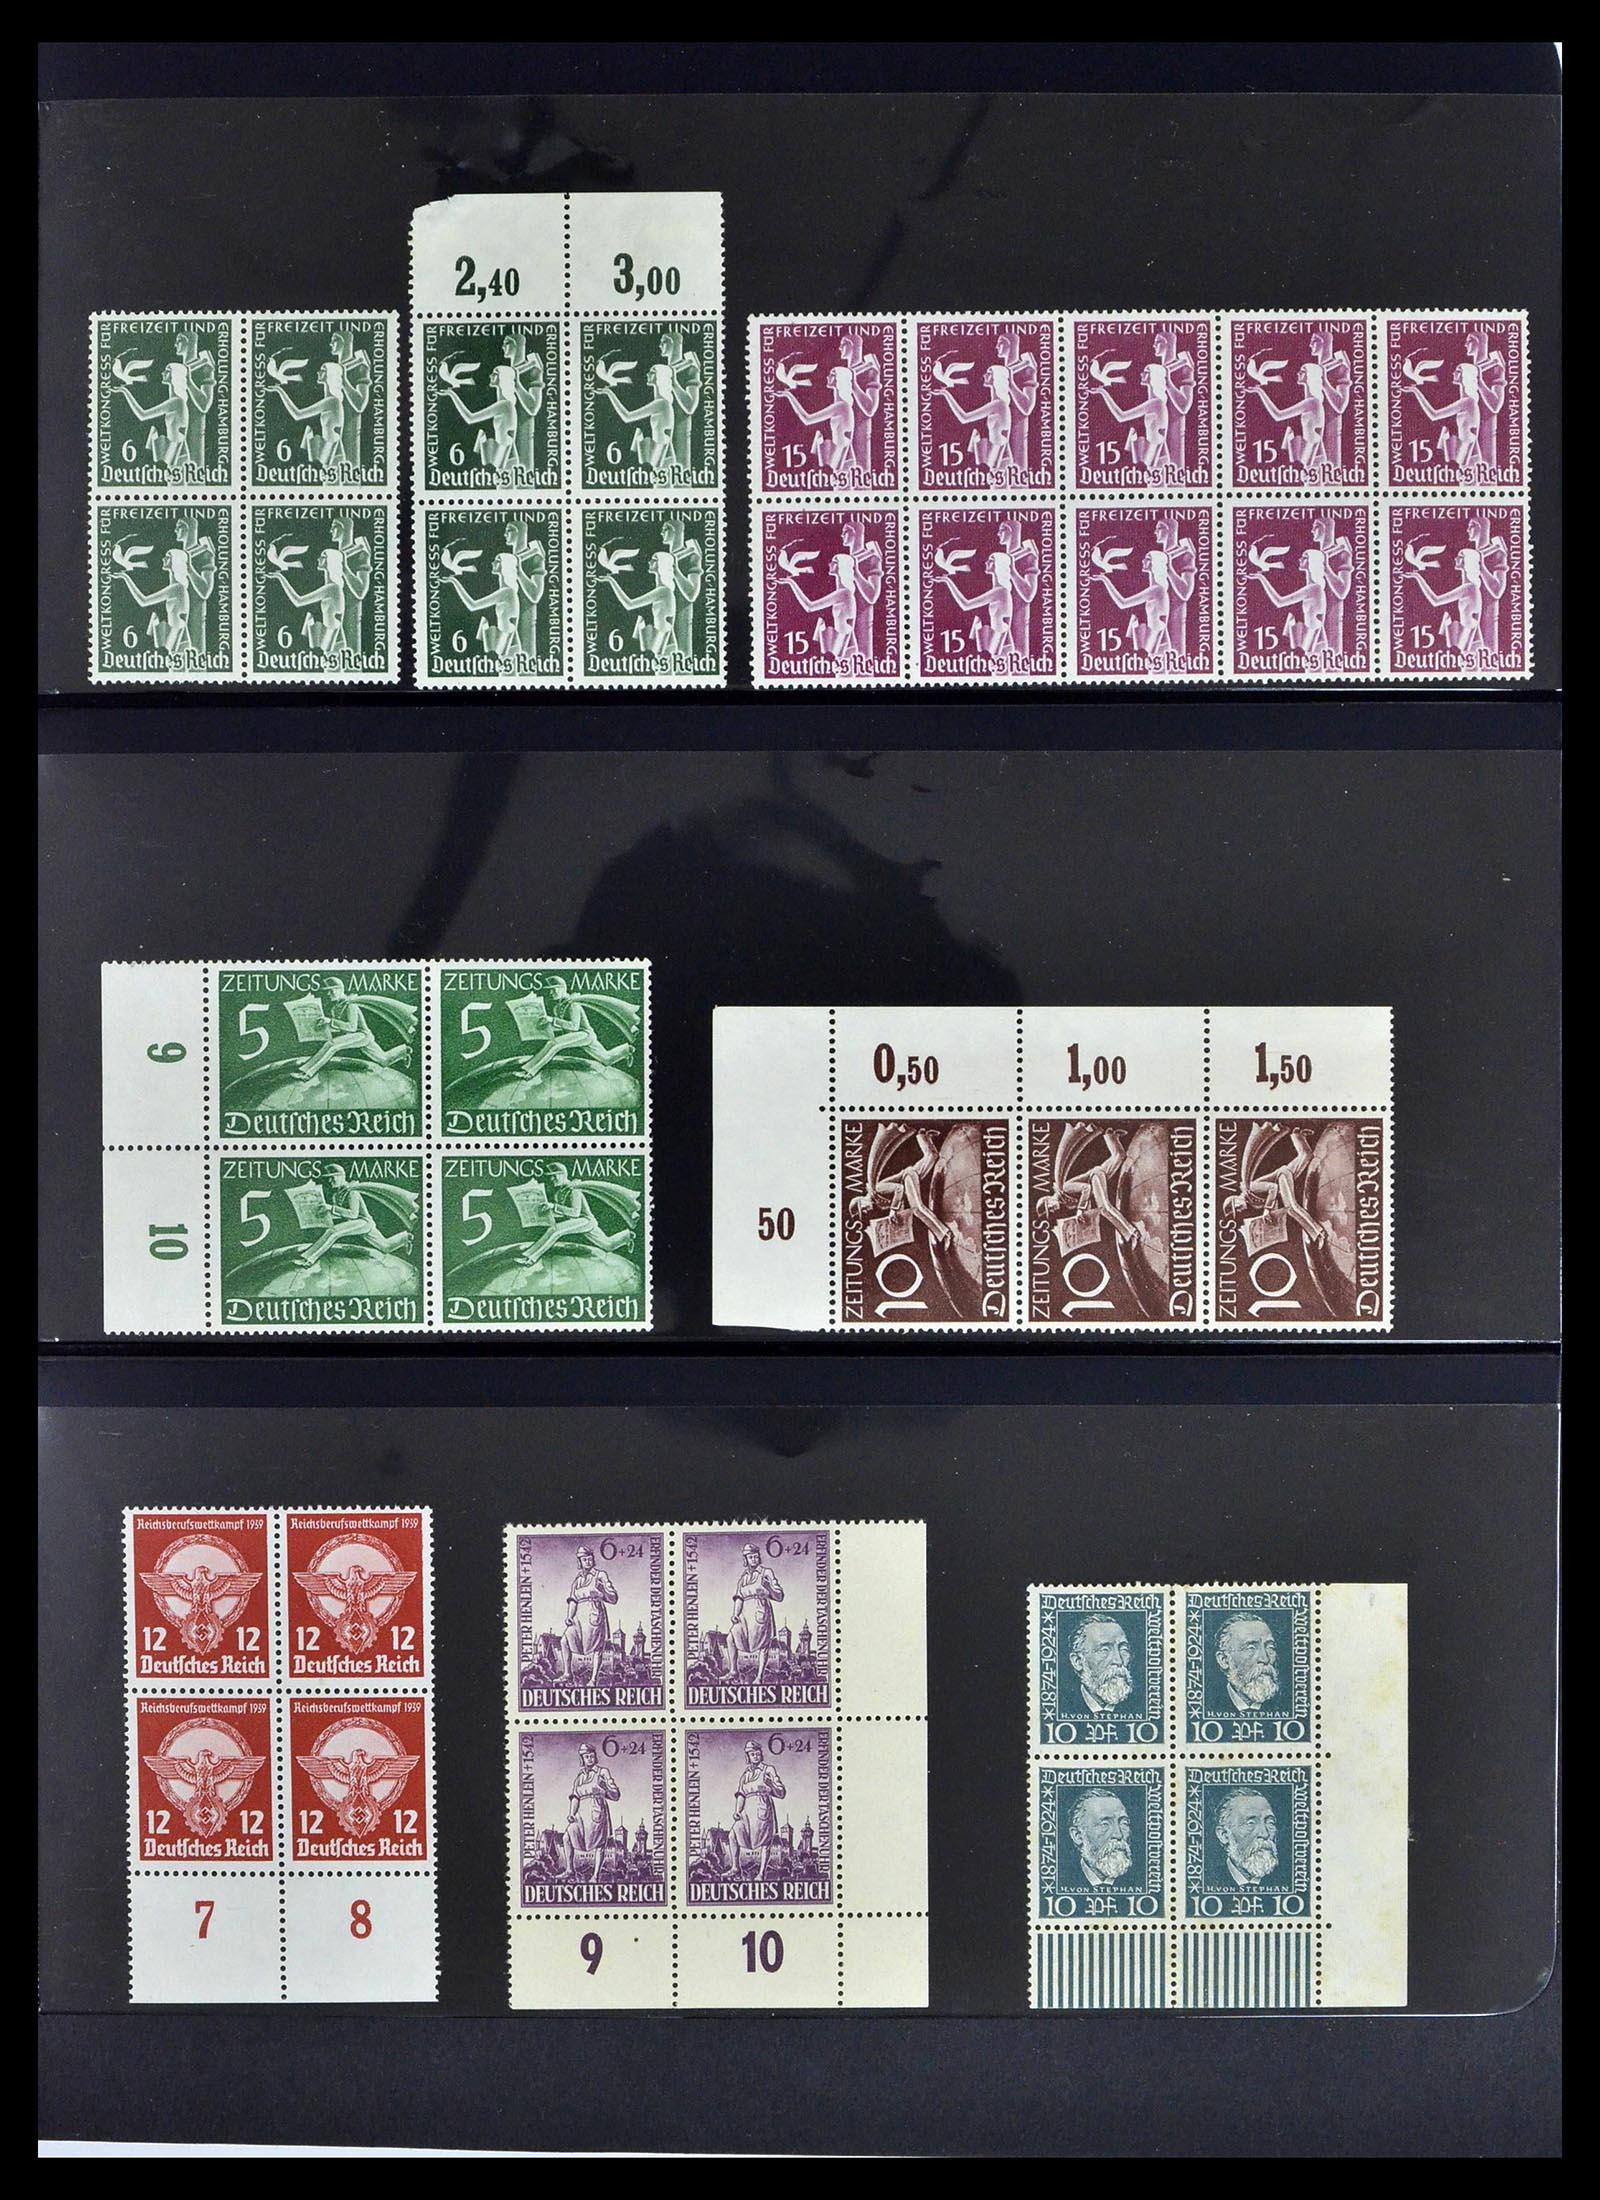 39255 0033 - Stamp collection 39255 German Reich MNH blocks of 4.